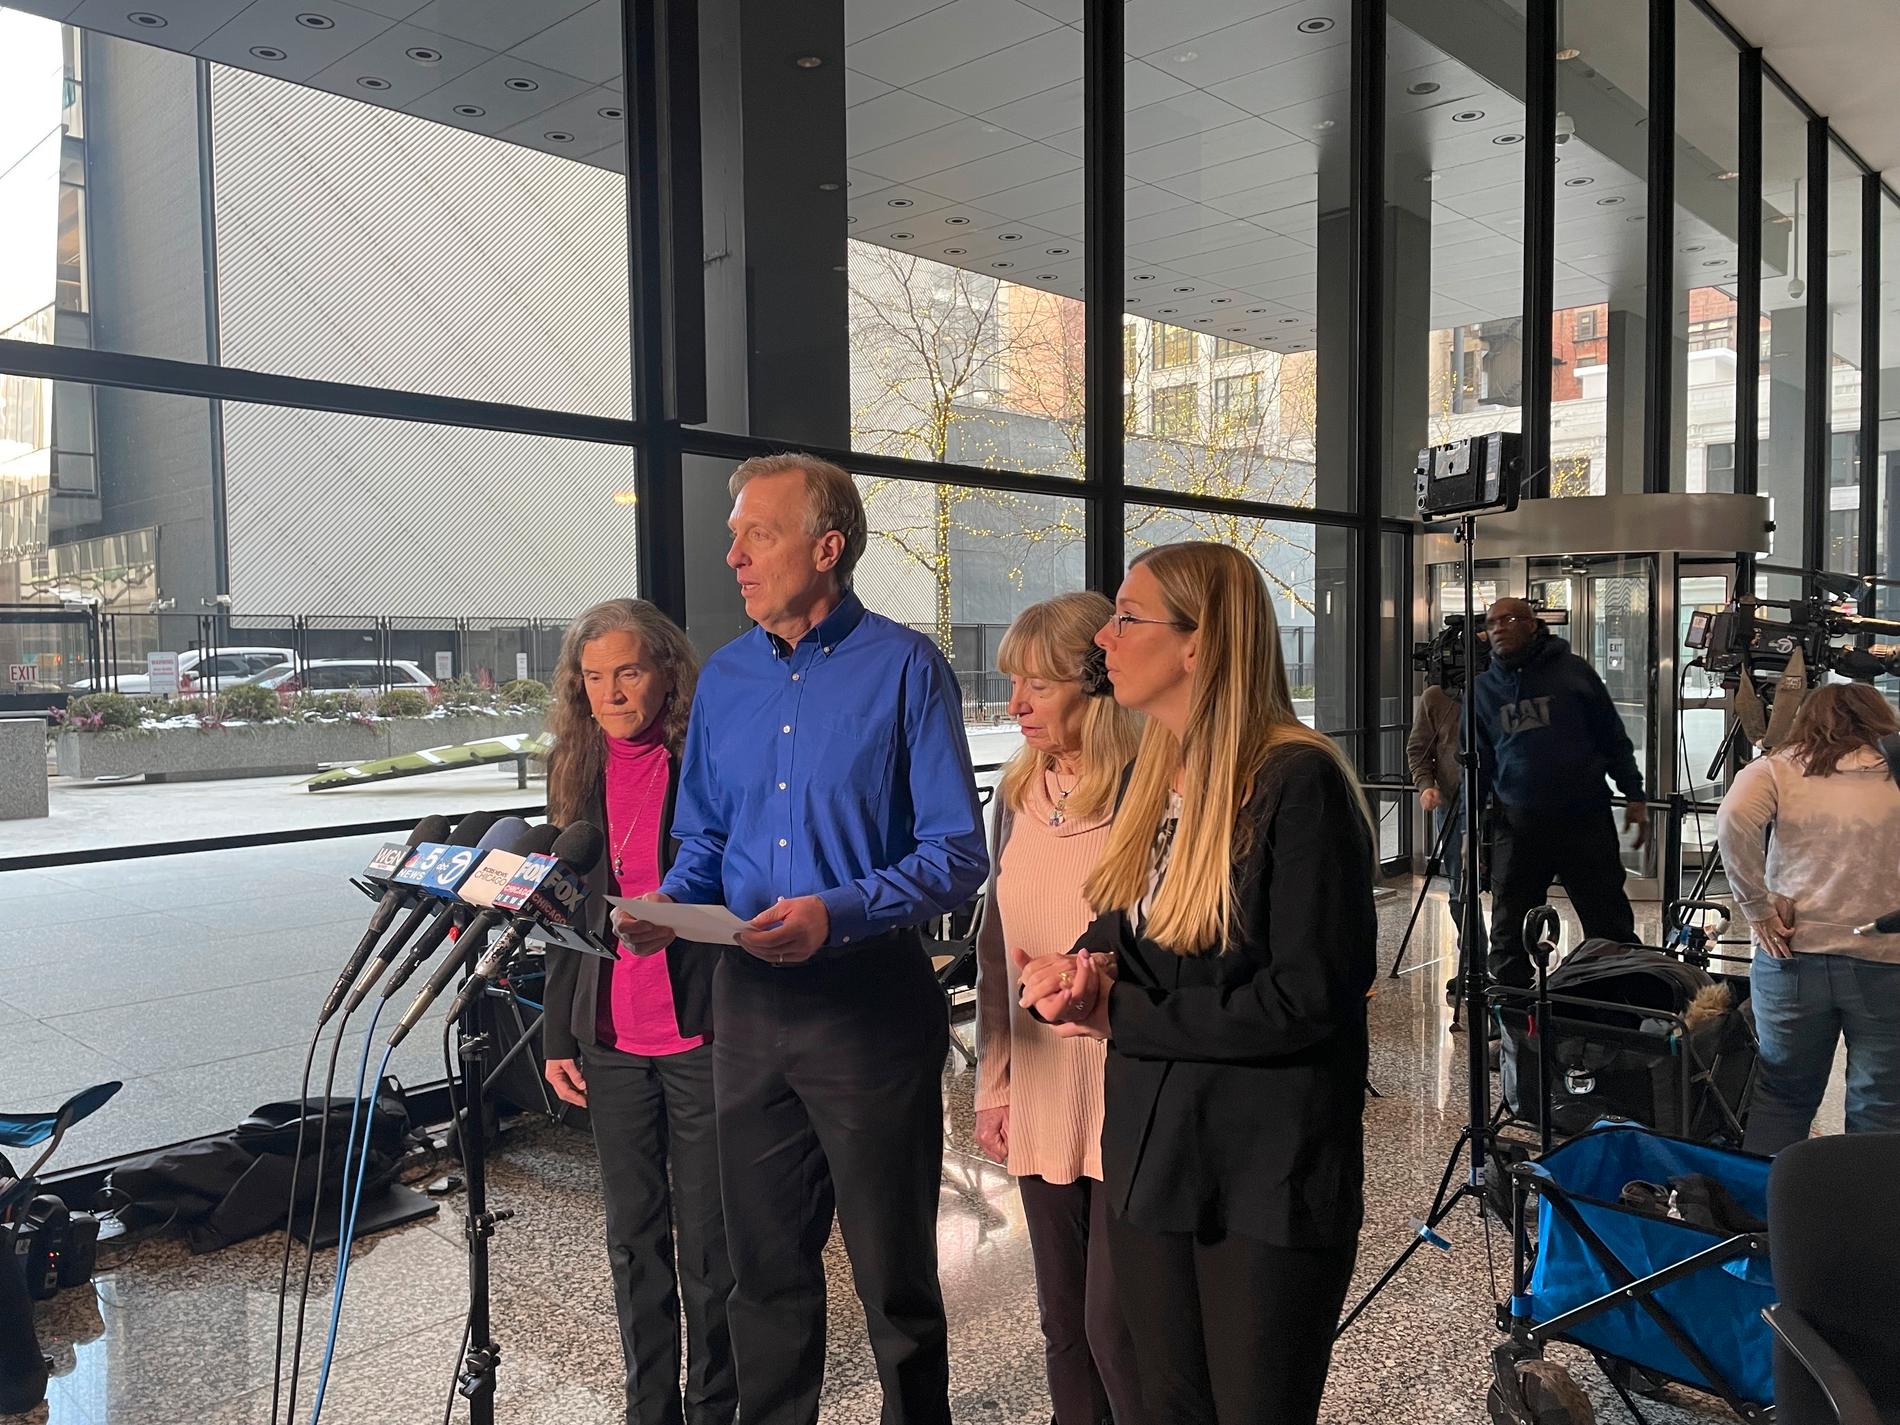 The late Sheila von Wiese-Mack's siblings, Bill Wiese and Debbie Curran, speak to the press after the sentencing in Dirksen federal court in Chicago on Wednesday. 